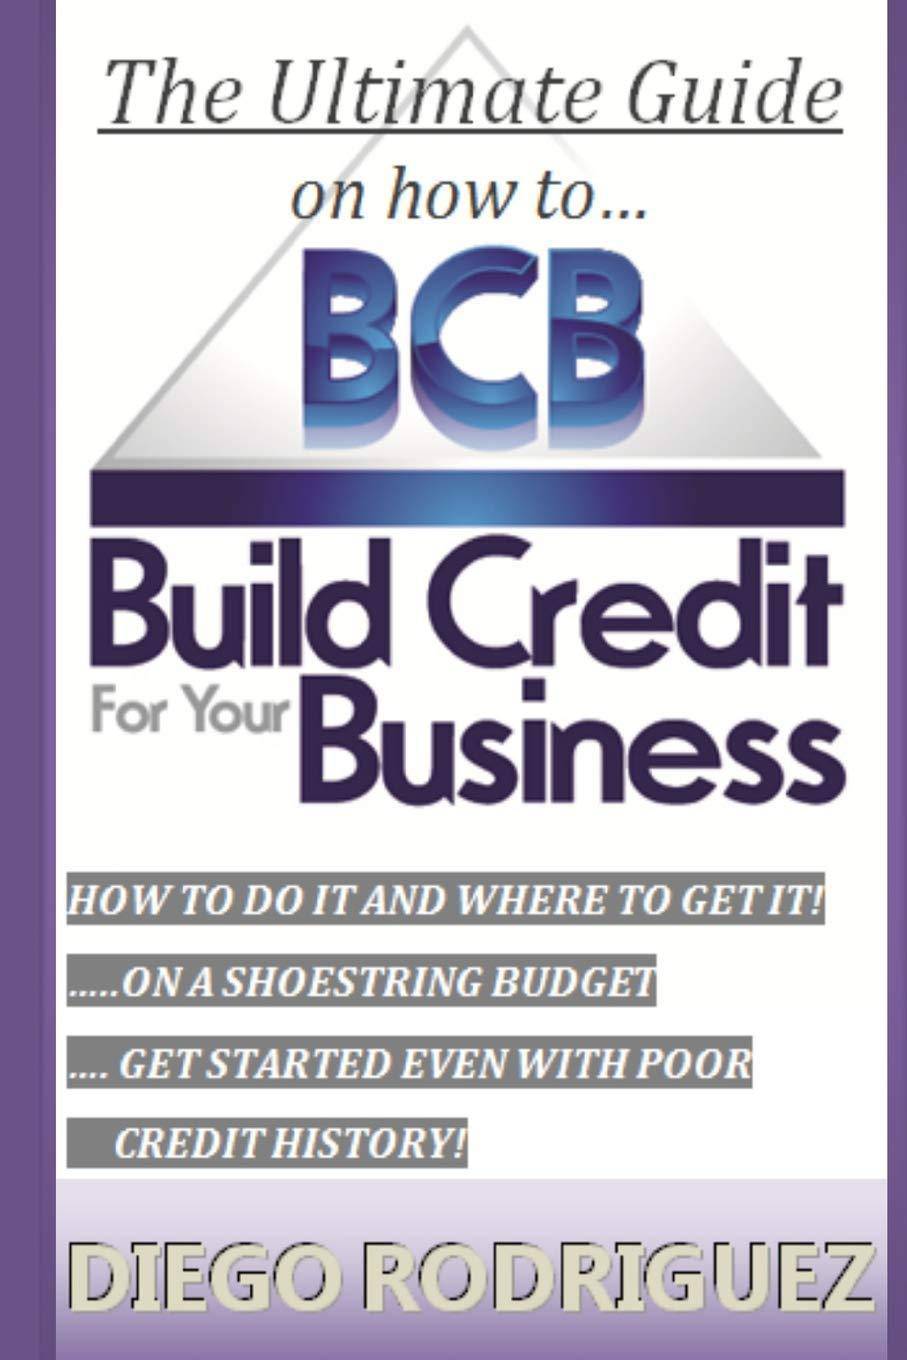 Ultimate Guide on How to Build Credit for Your Business: The Ult - SureShot Books Publishing LLC